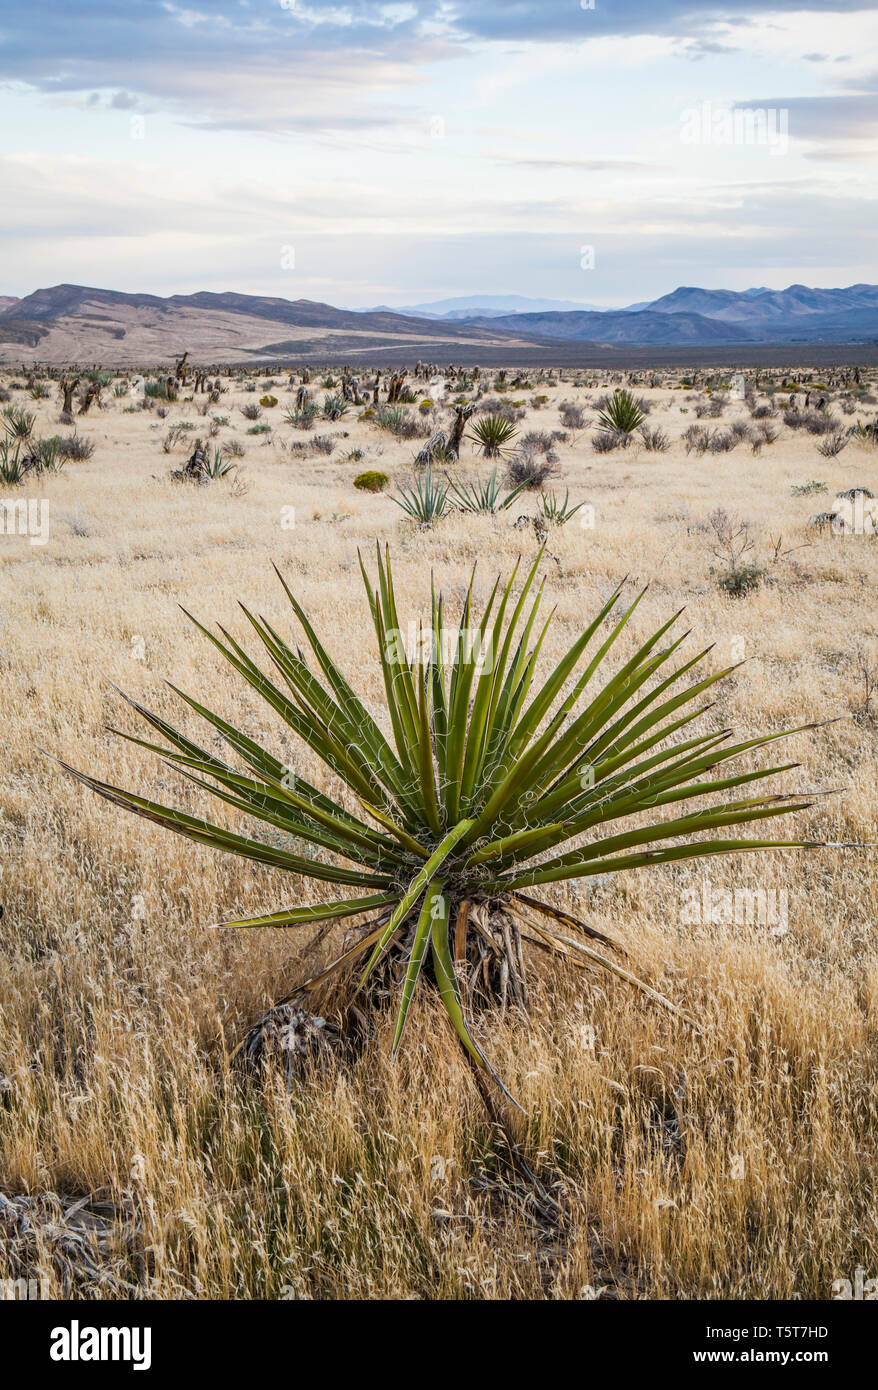 Yucca Mojave, Red Rock Canyon Conservation Area, Nevada, USA Banque D'Images